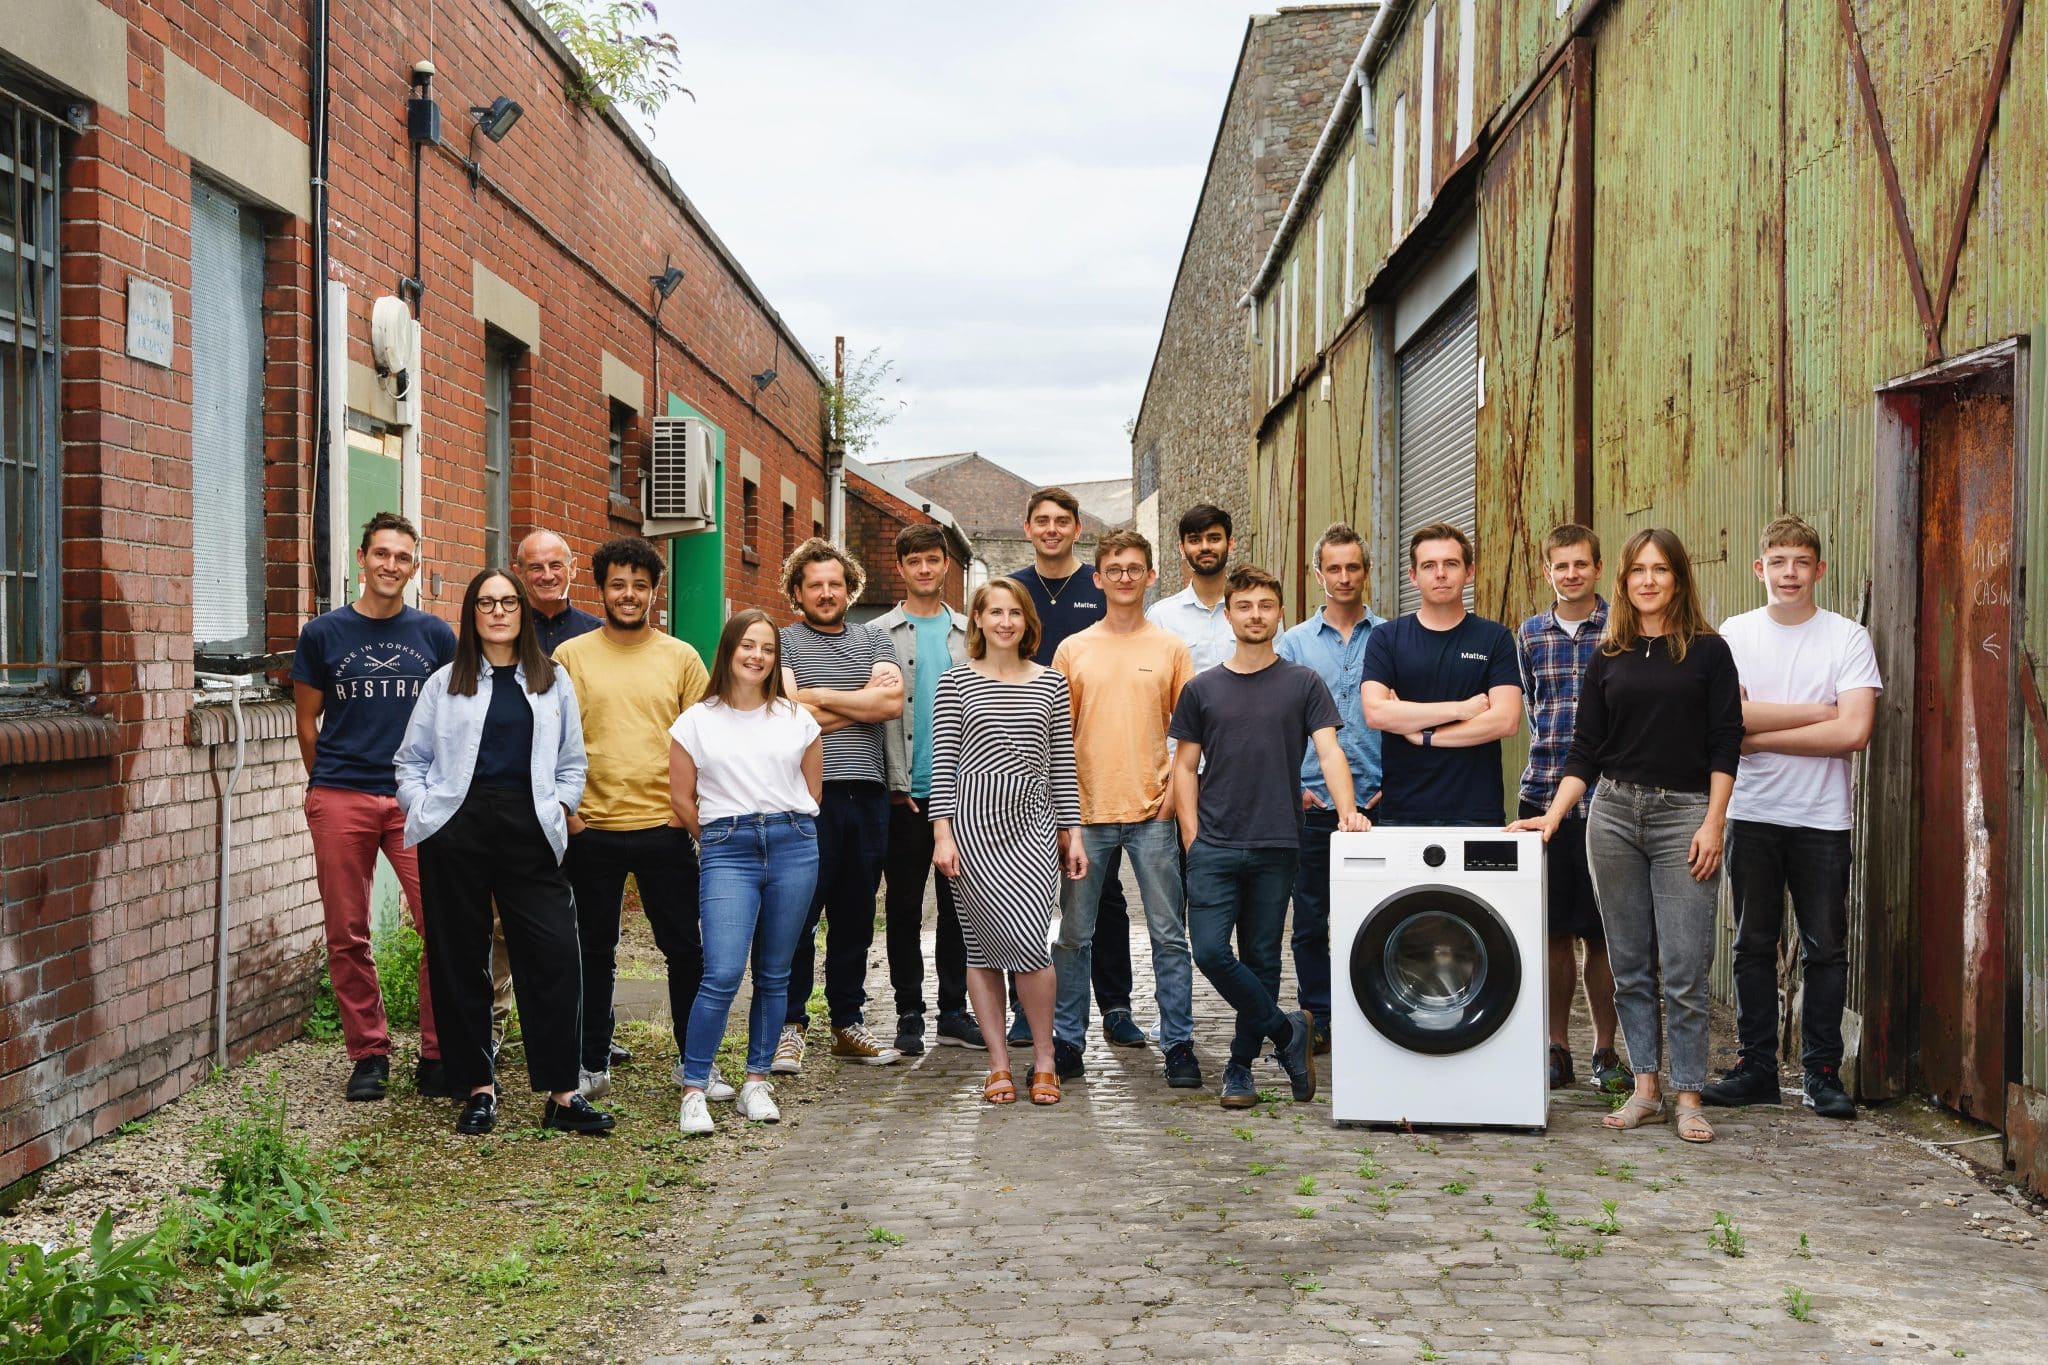 Bristol-based Matter secures €9 million to remove and recycle microplastics from wastewater | EU-Startups